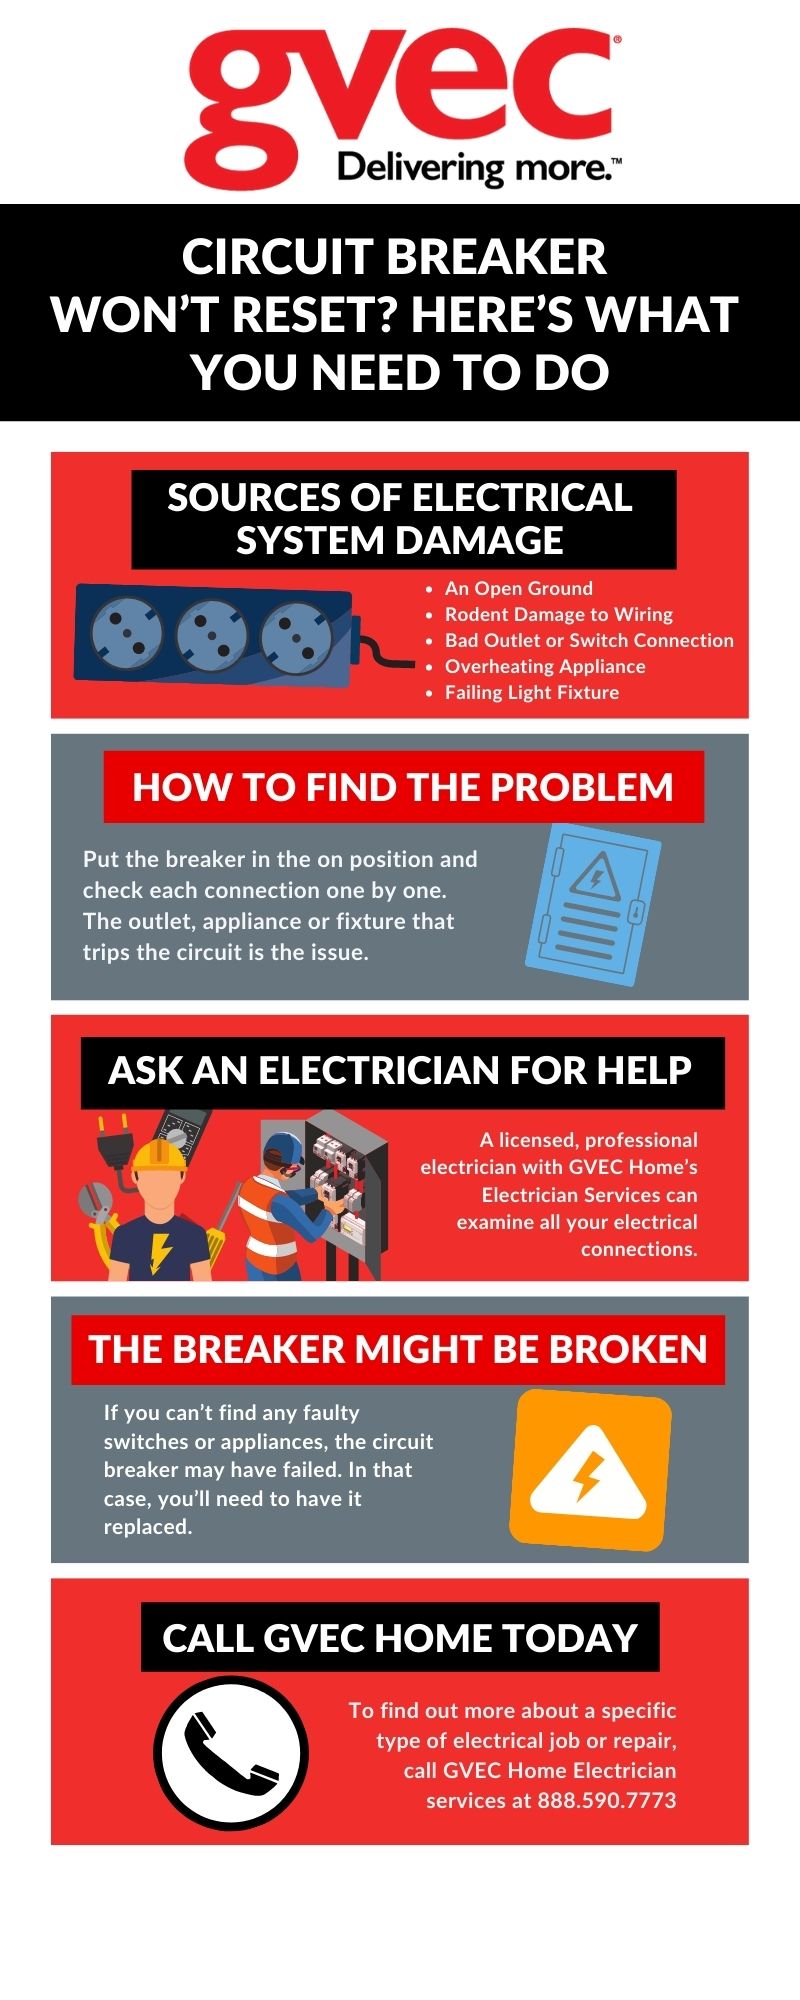 Circuit Breaker Won't Reset? Here's What You Need to Do